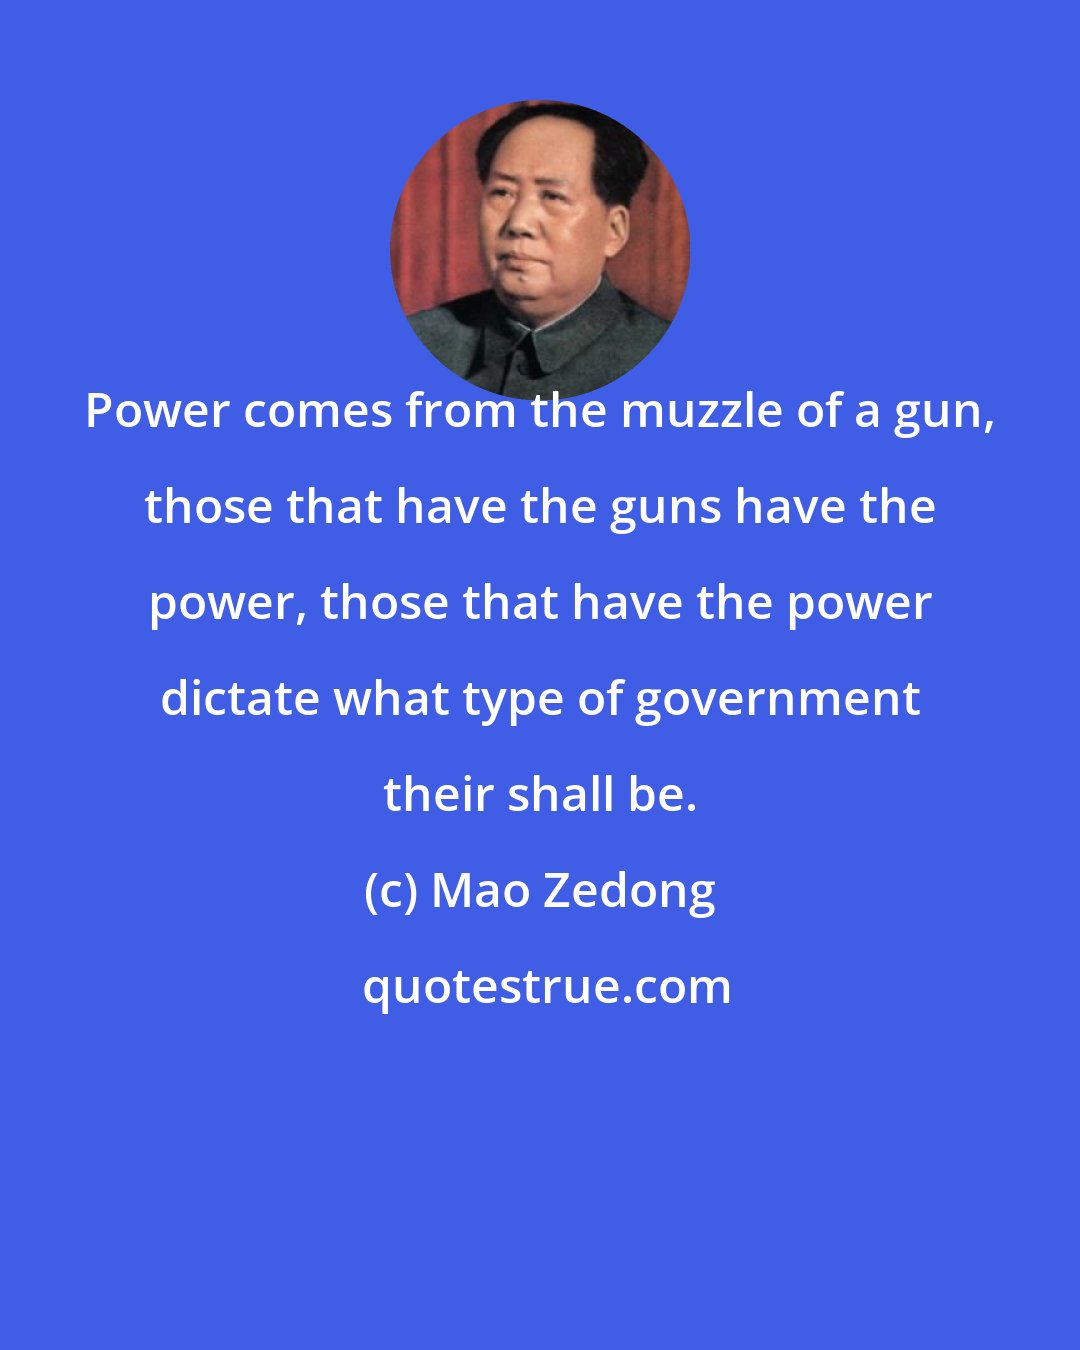 Mao Zedong: Power comes from the muzzle of a gun, those that have the guns have the power, those that have the power dictate what type of government their shall be.